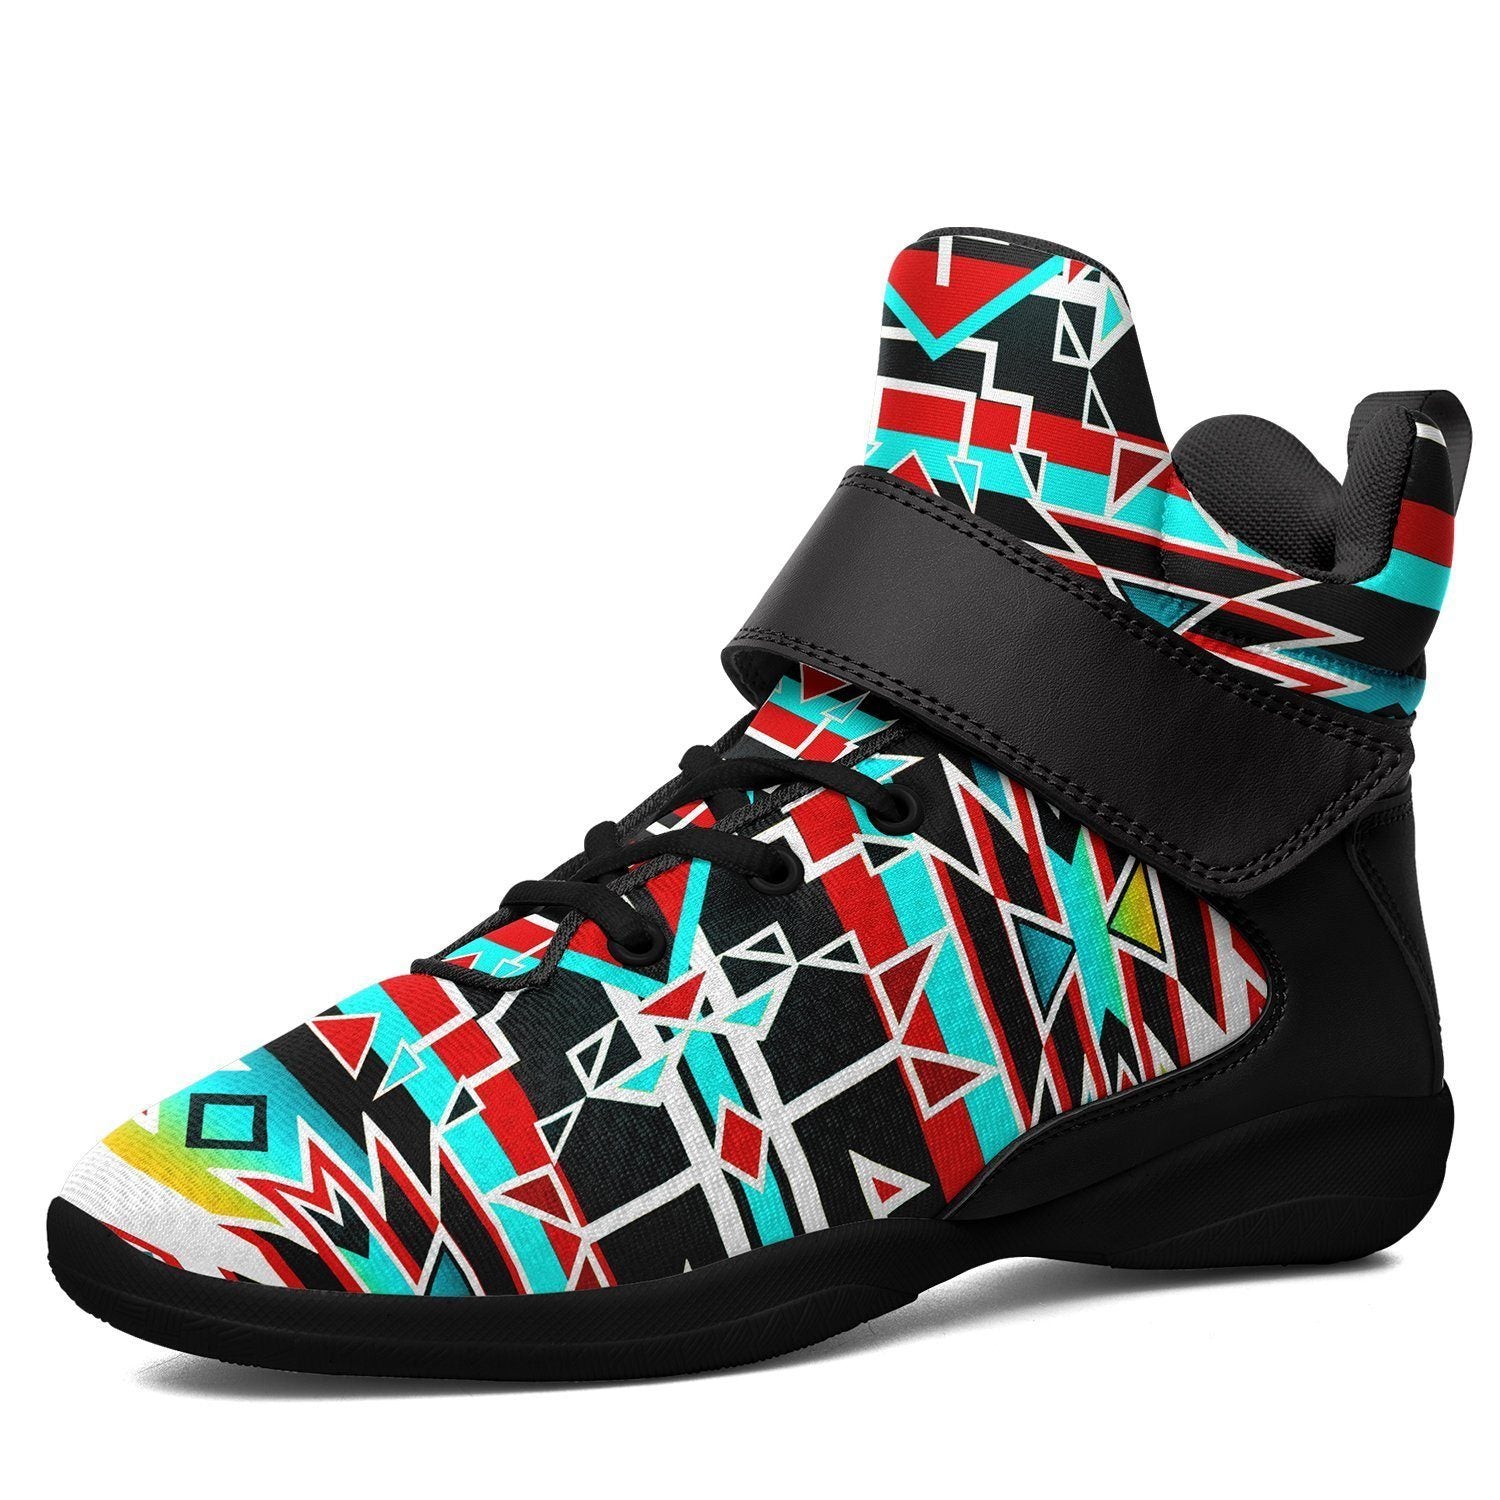 Force of Nature Windstorm Ipottaa Basketball / Sport High Top Shoes - Black Sole 49 Dzine US Men 7 / EUR 40 Black Sole with Black Strap 